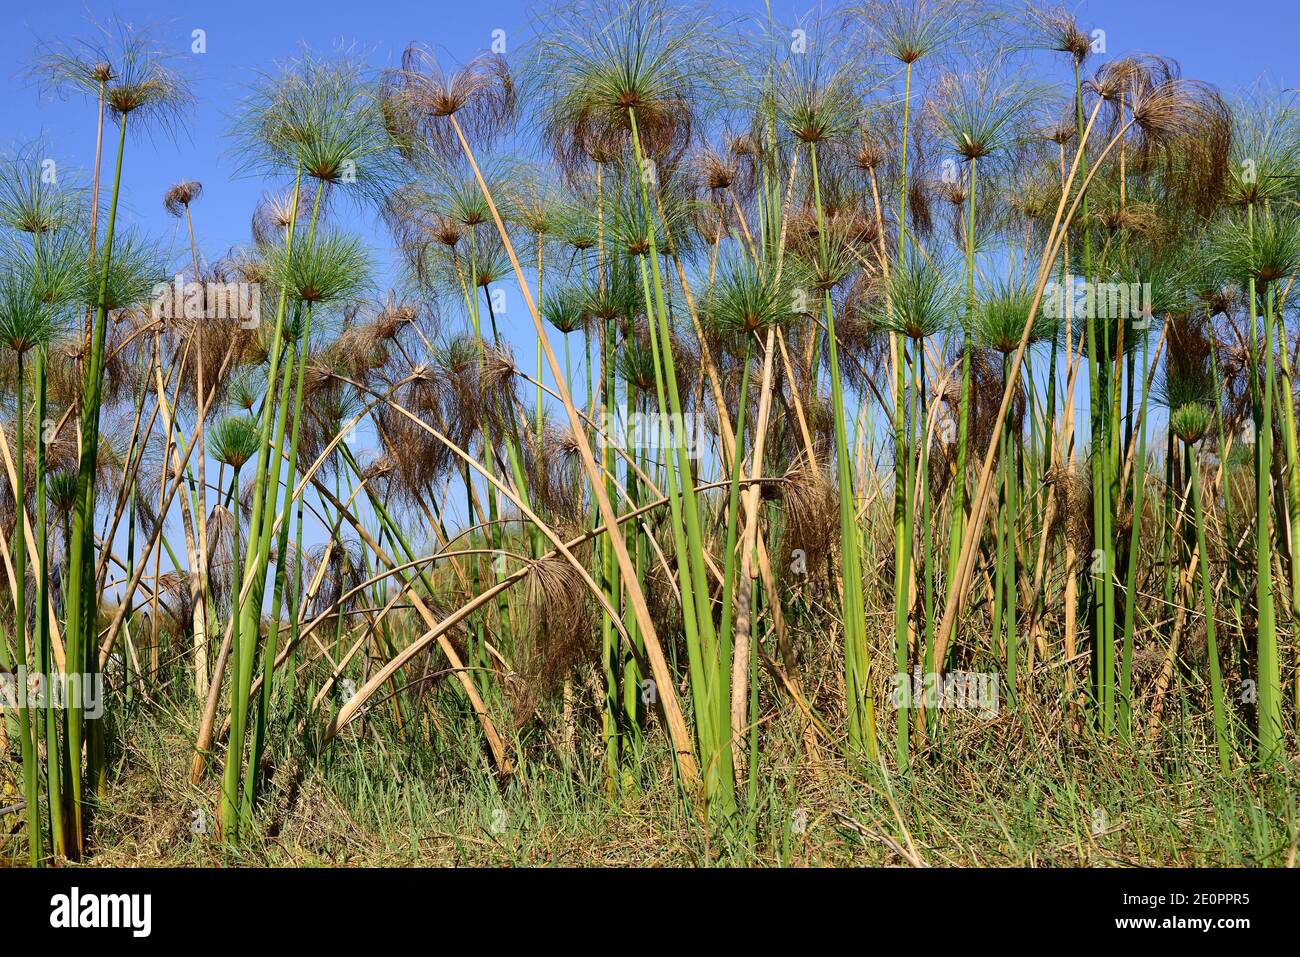 Papyrus sedge or Nile grass (Cyperus papyrus) is an aquatic perennial herb native to Africa. This photo was taken in Okavango Delta, Botswana. Stock Photo